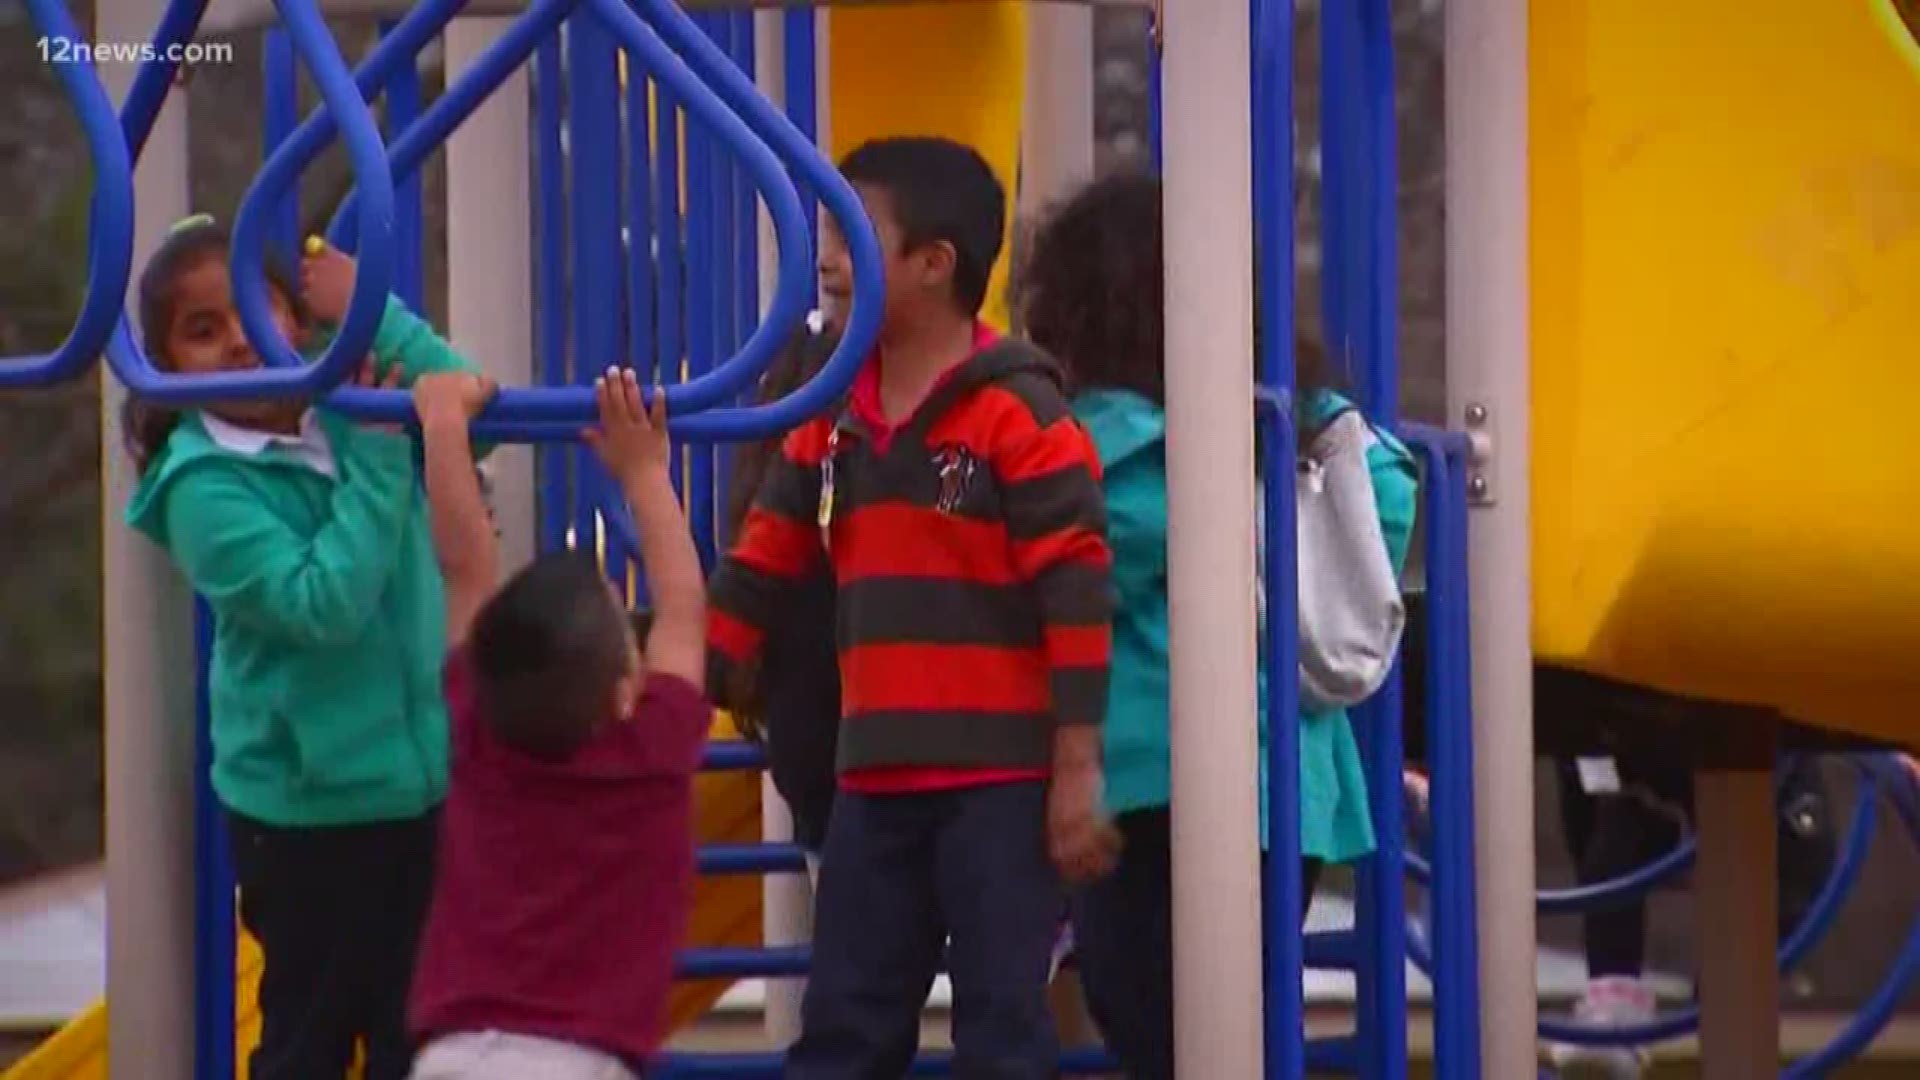 There's plenty of research suggesting that recess helps kids learn.